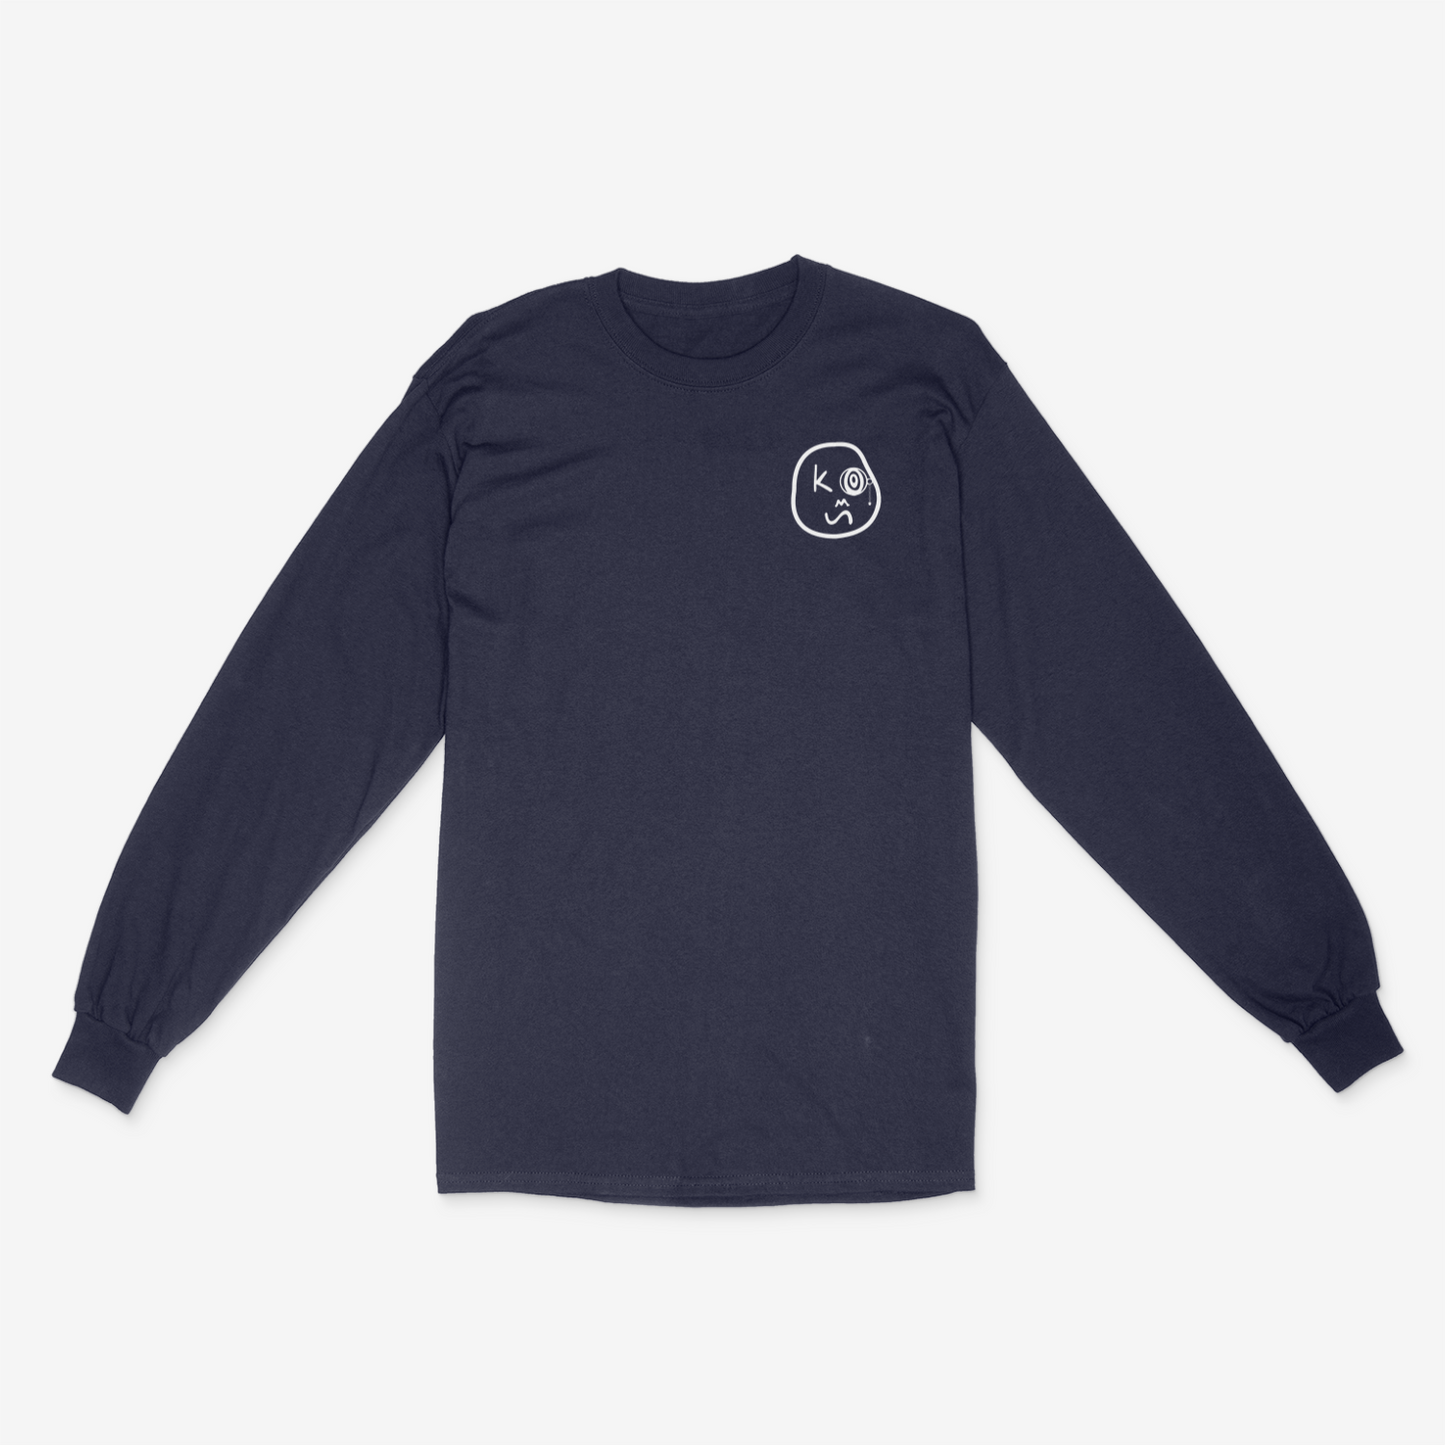 “Perspective” Long Sleeve